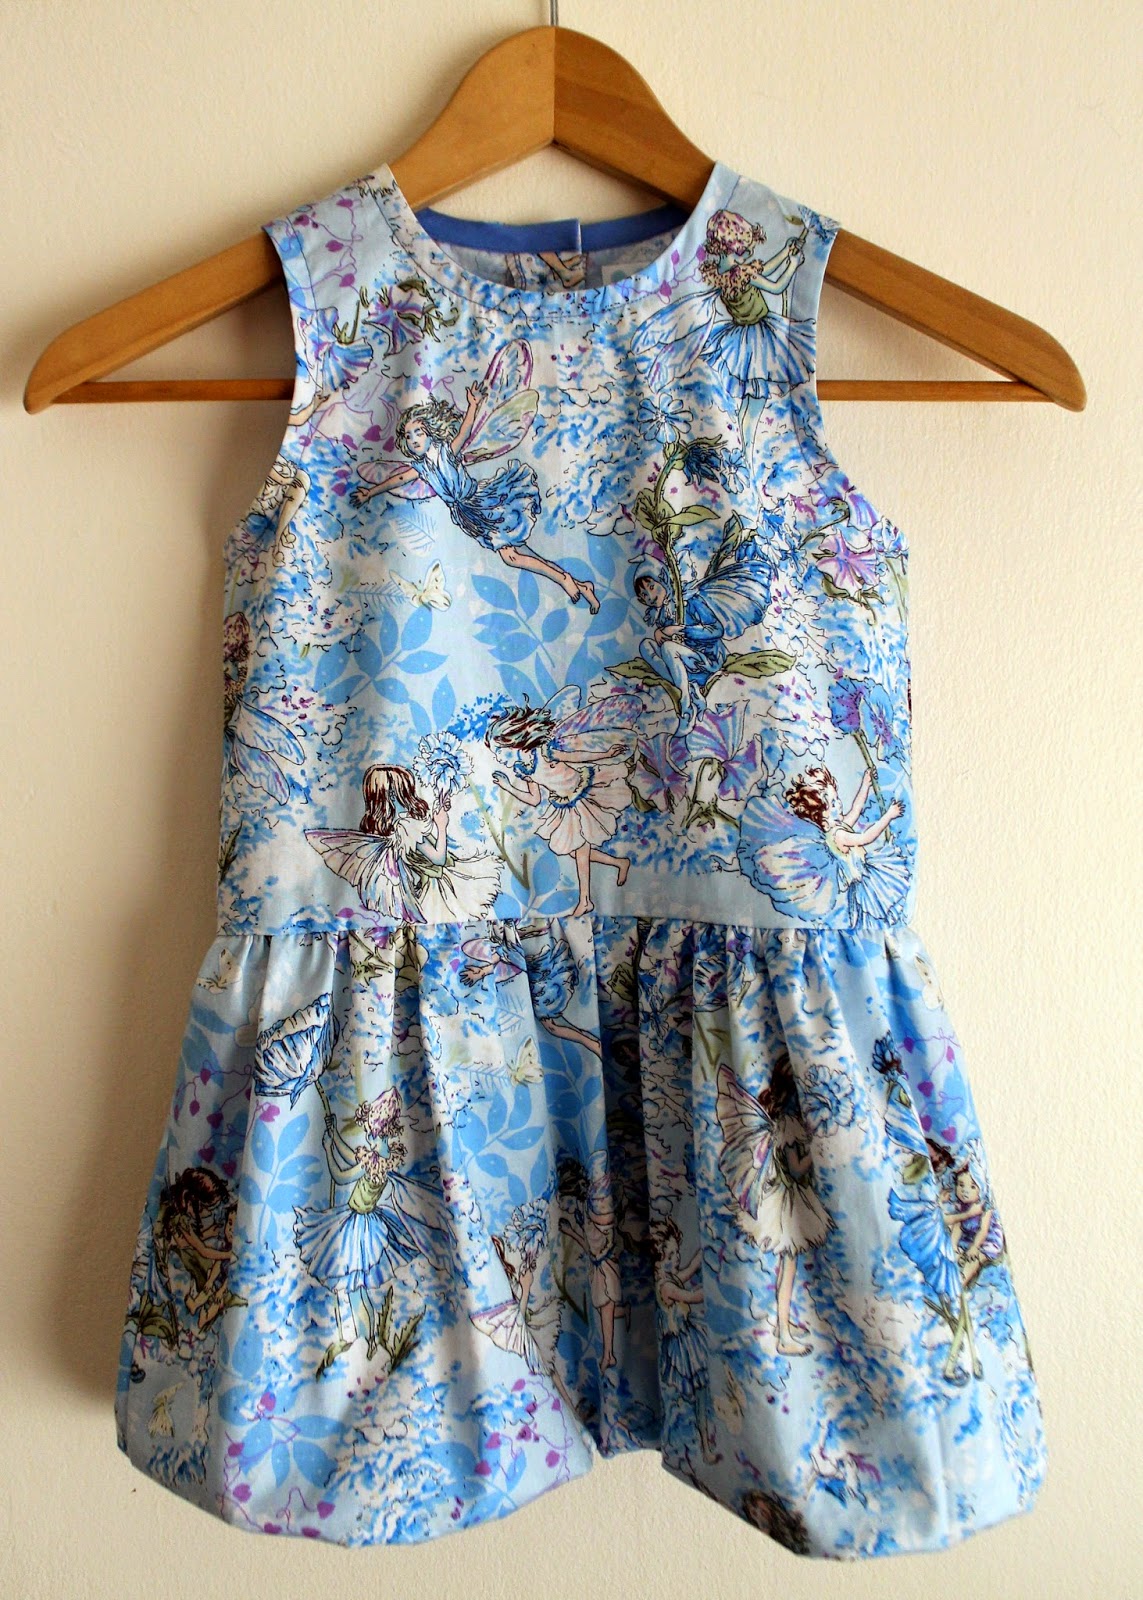 Cookin' & Craftin': Bubble Fairy Twin Dresses